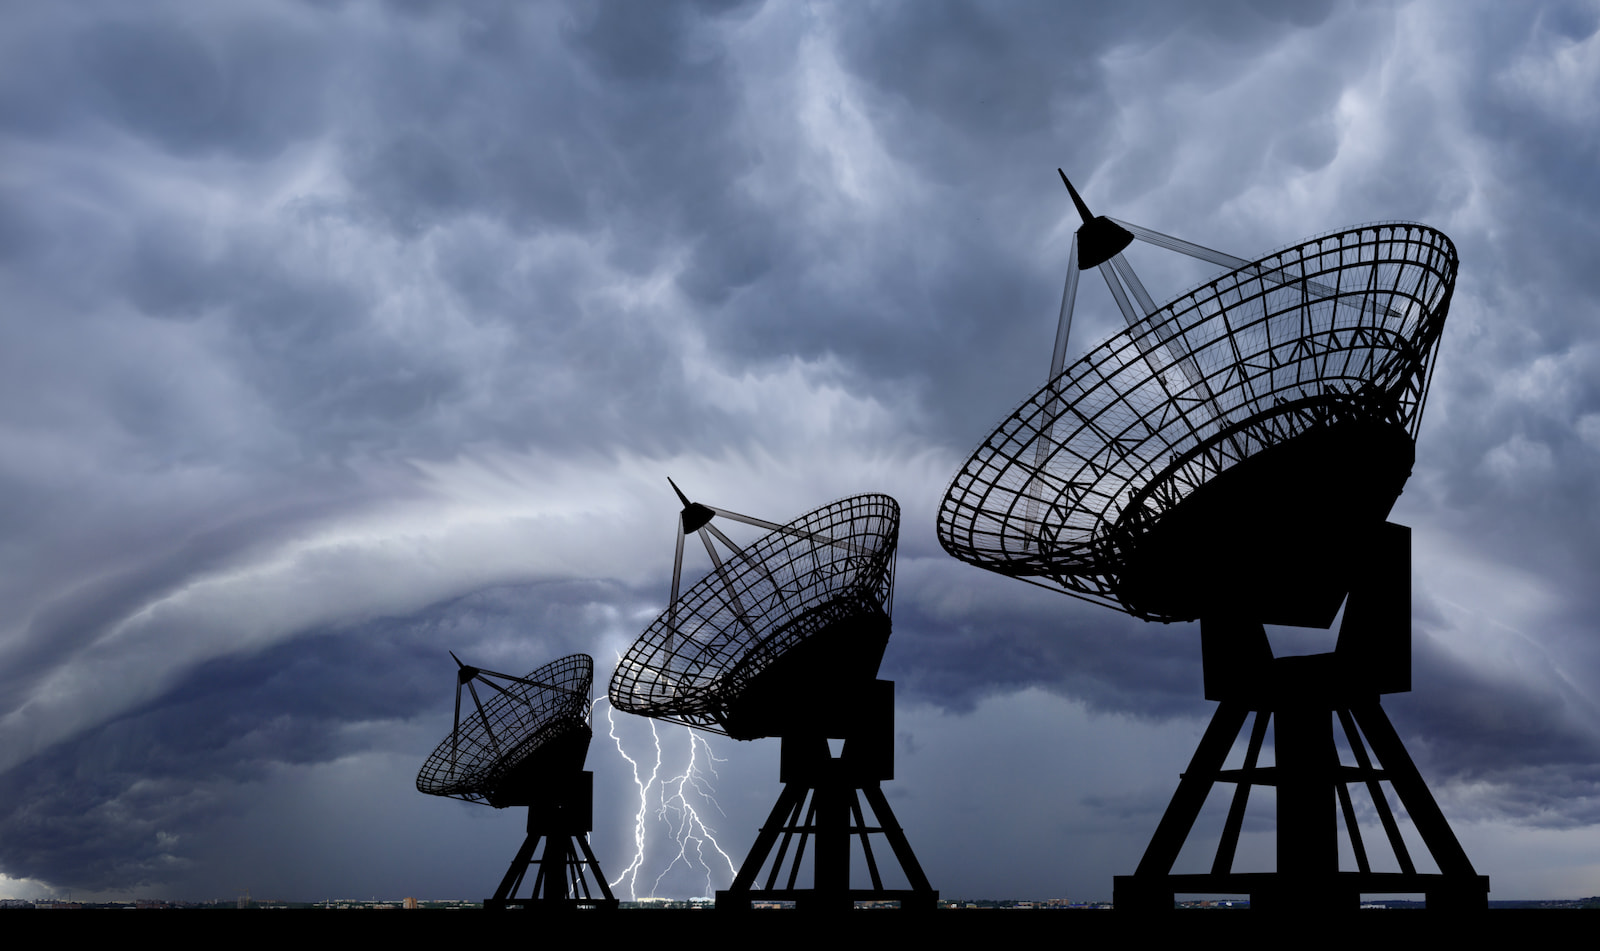 Satellite ground station during a storm